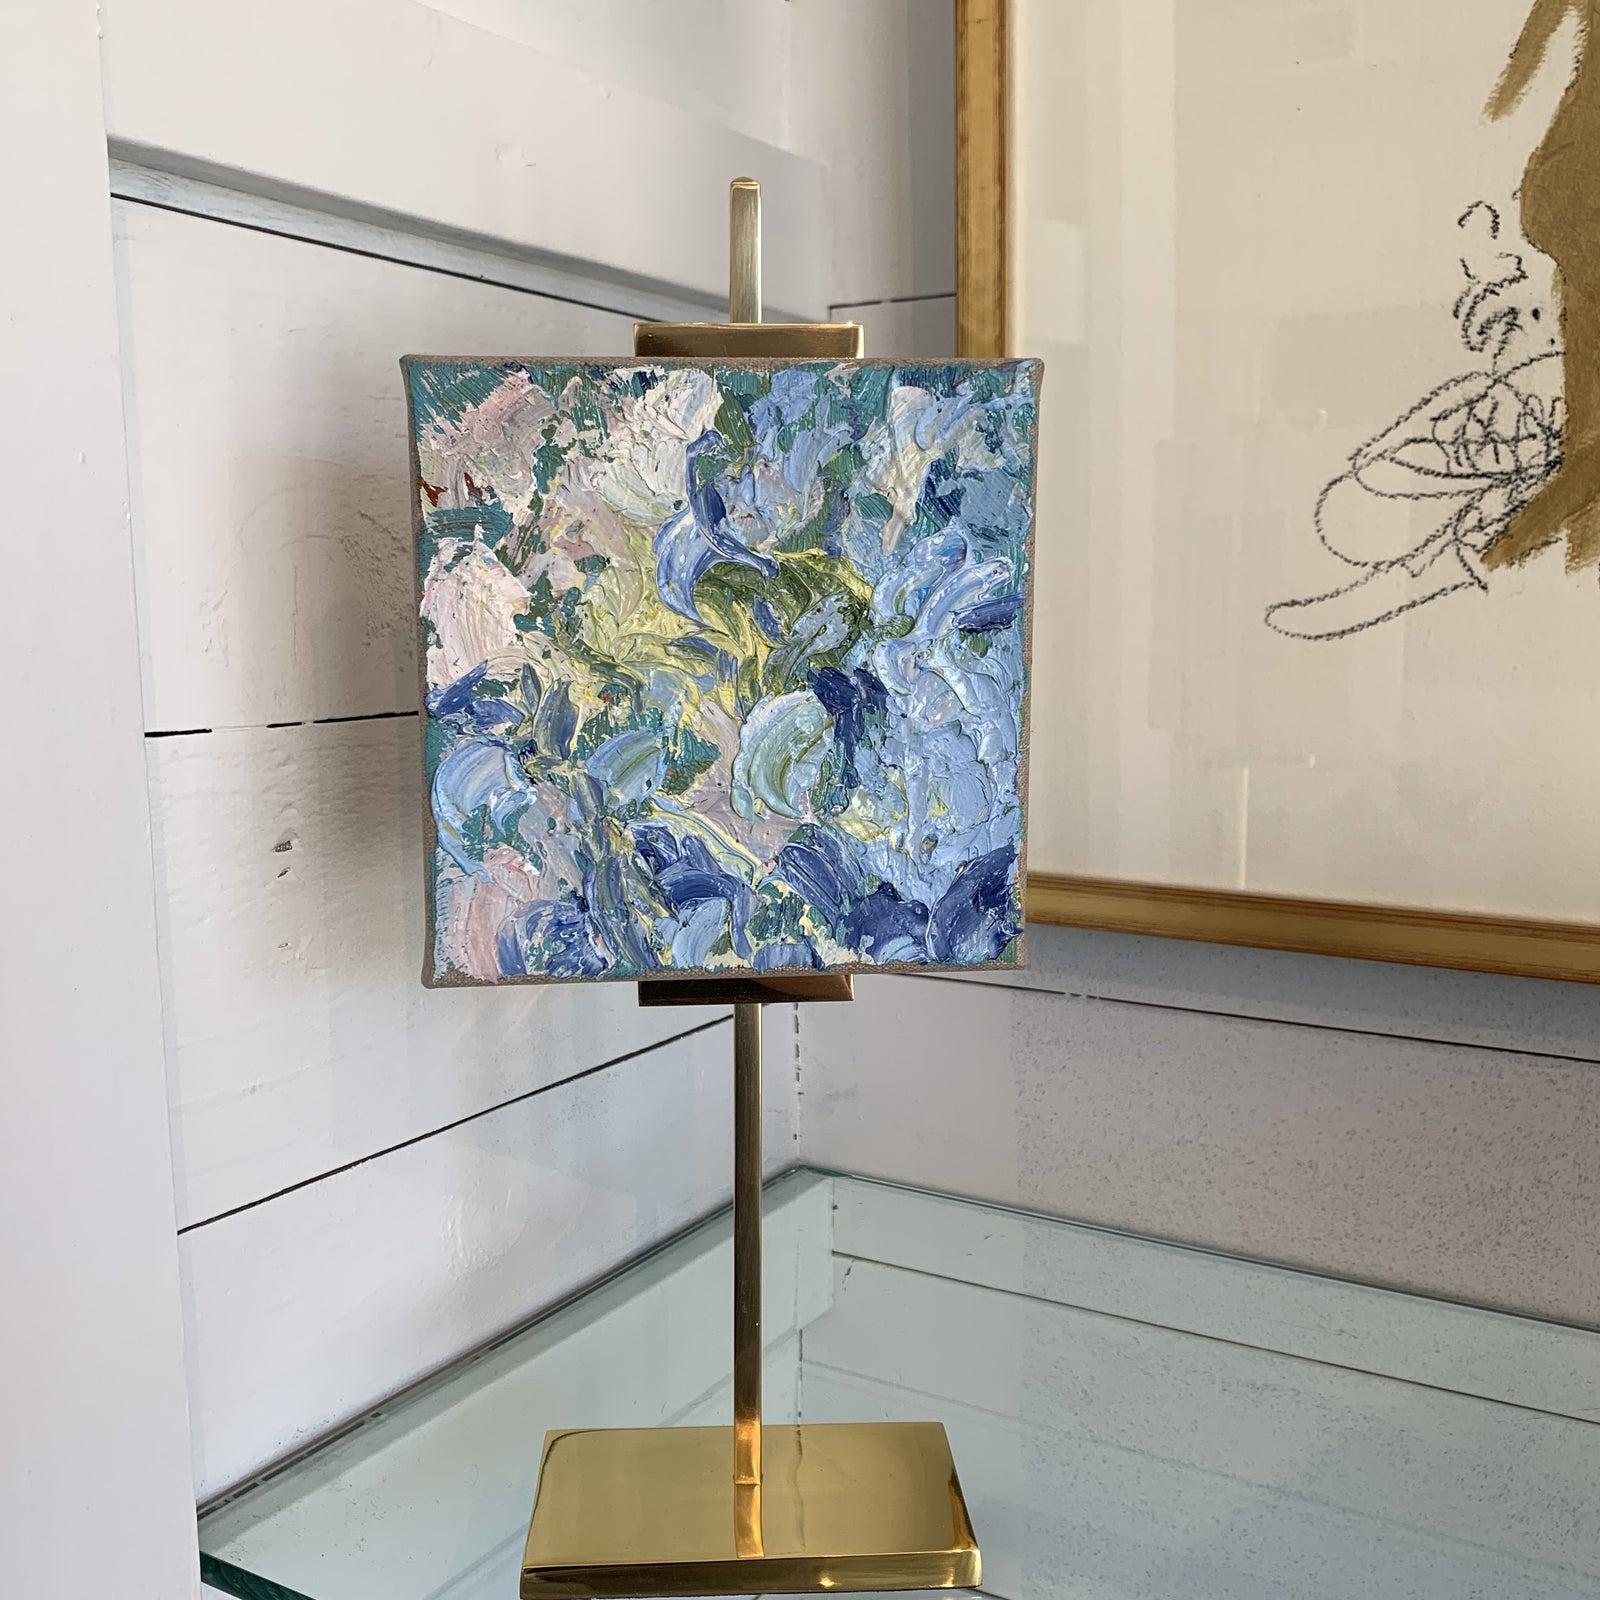 Stunning Mini Oil Painting on Gold Brass Adjustable Art Easel. The gallery currently has a collection of these limited time only small paintings by Stephanie Wheeler. 
The gold brass easel is easily adjustable. The oil itself is a 6 x 6 signed on